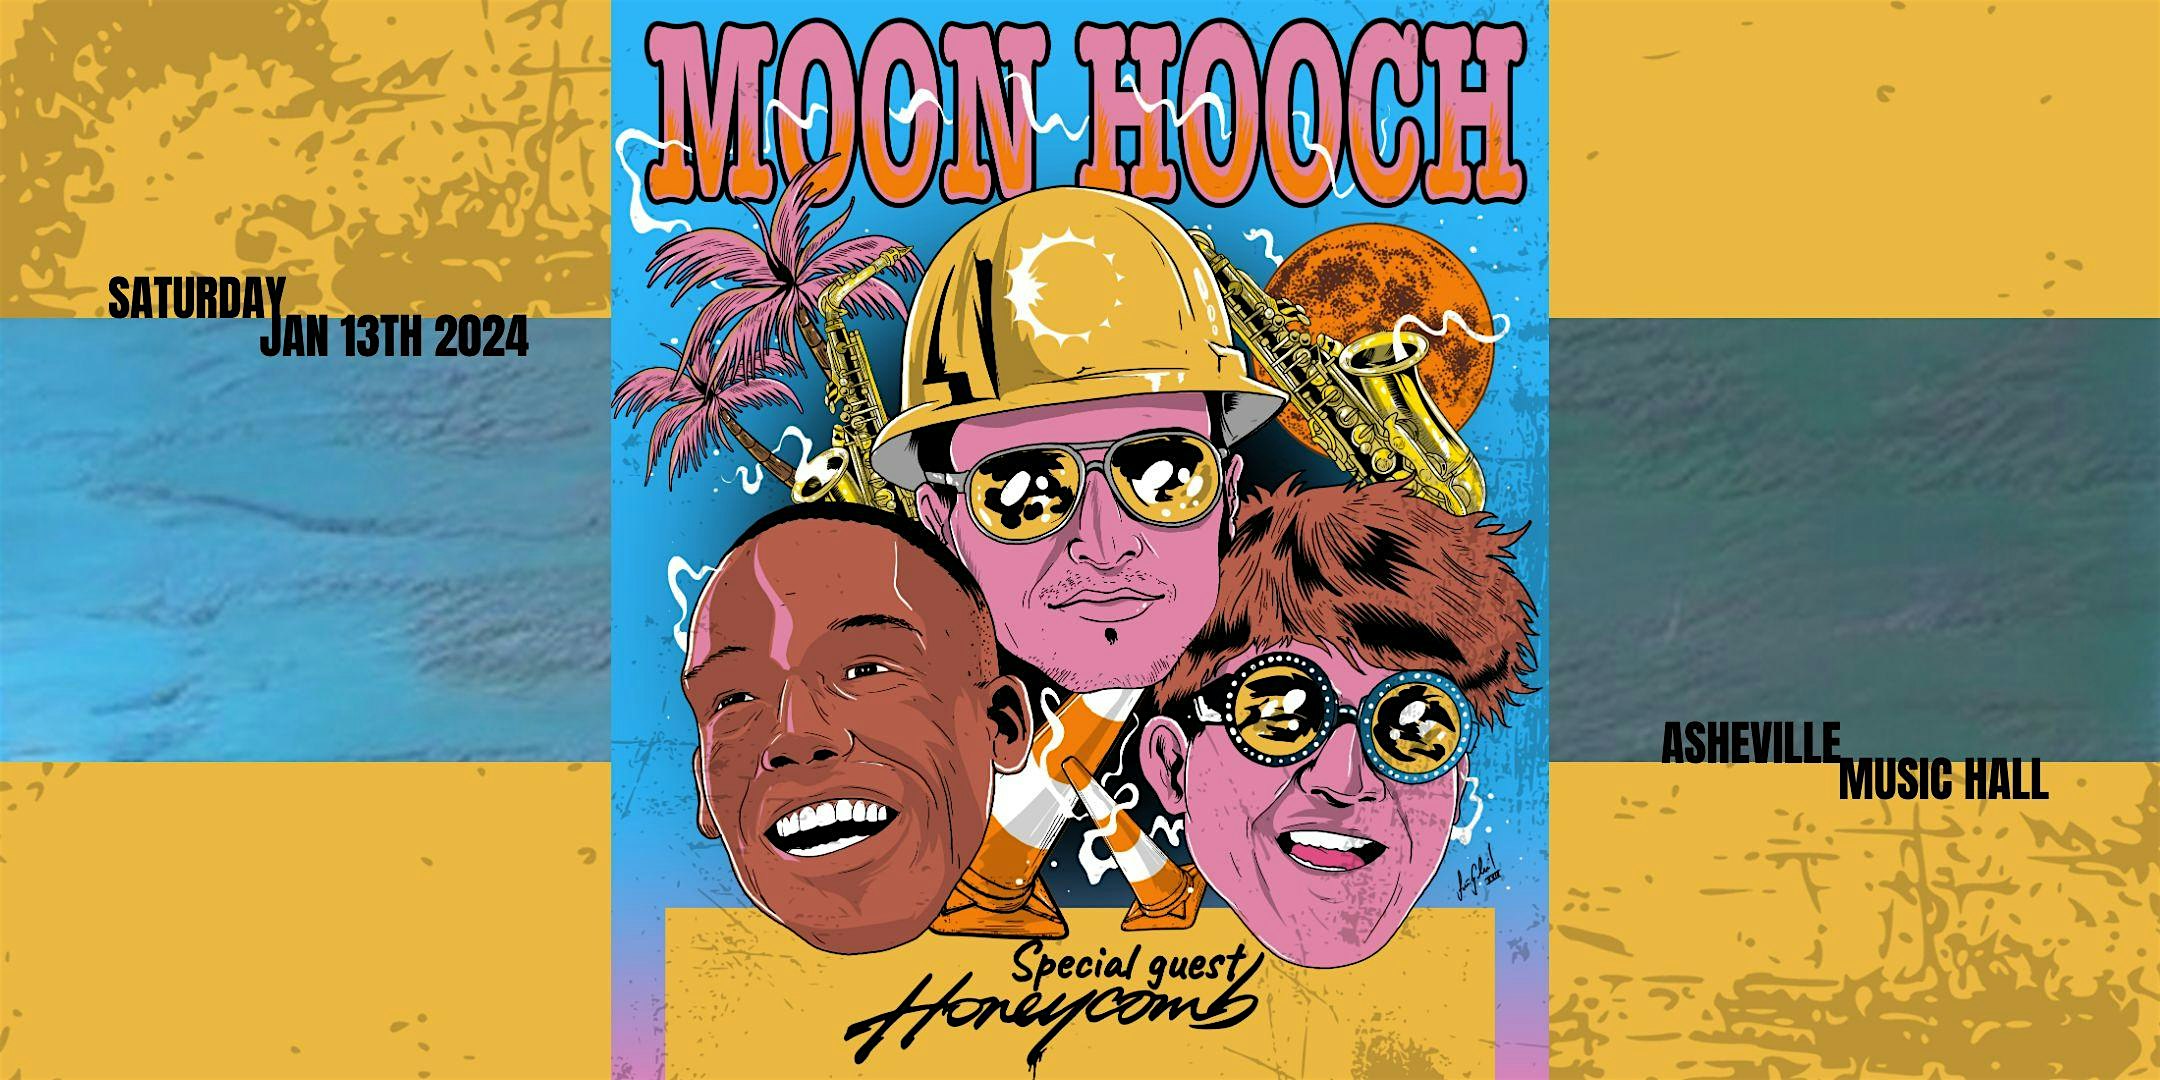 Moon Hooch with special guest Honeycomb